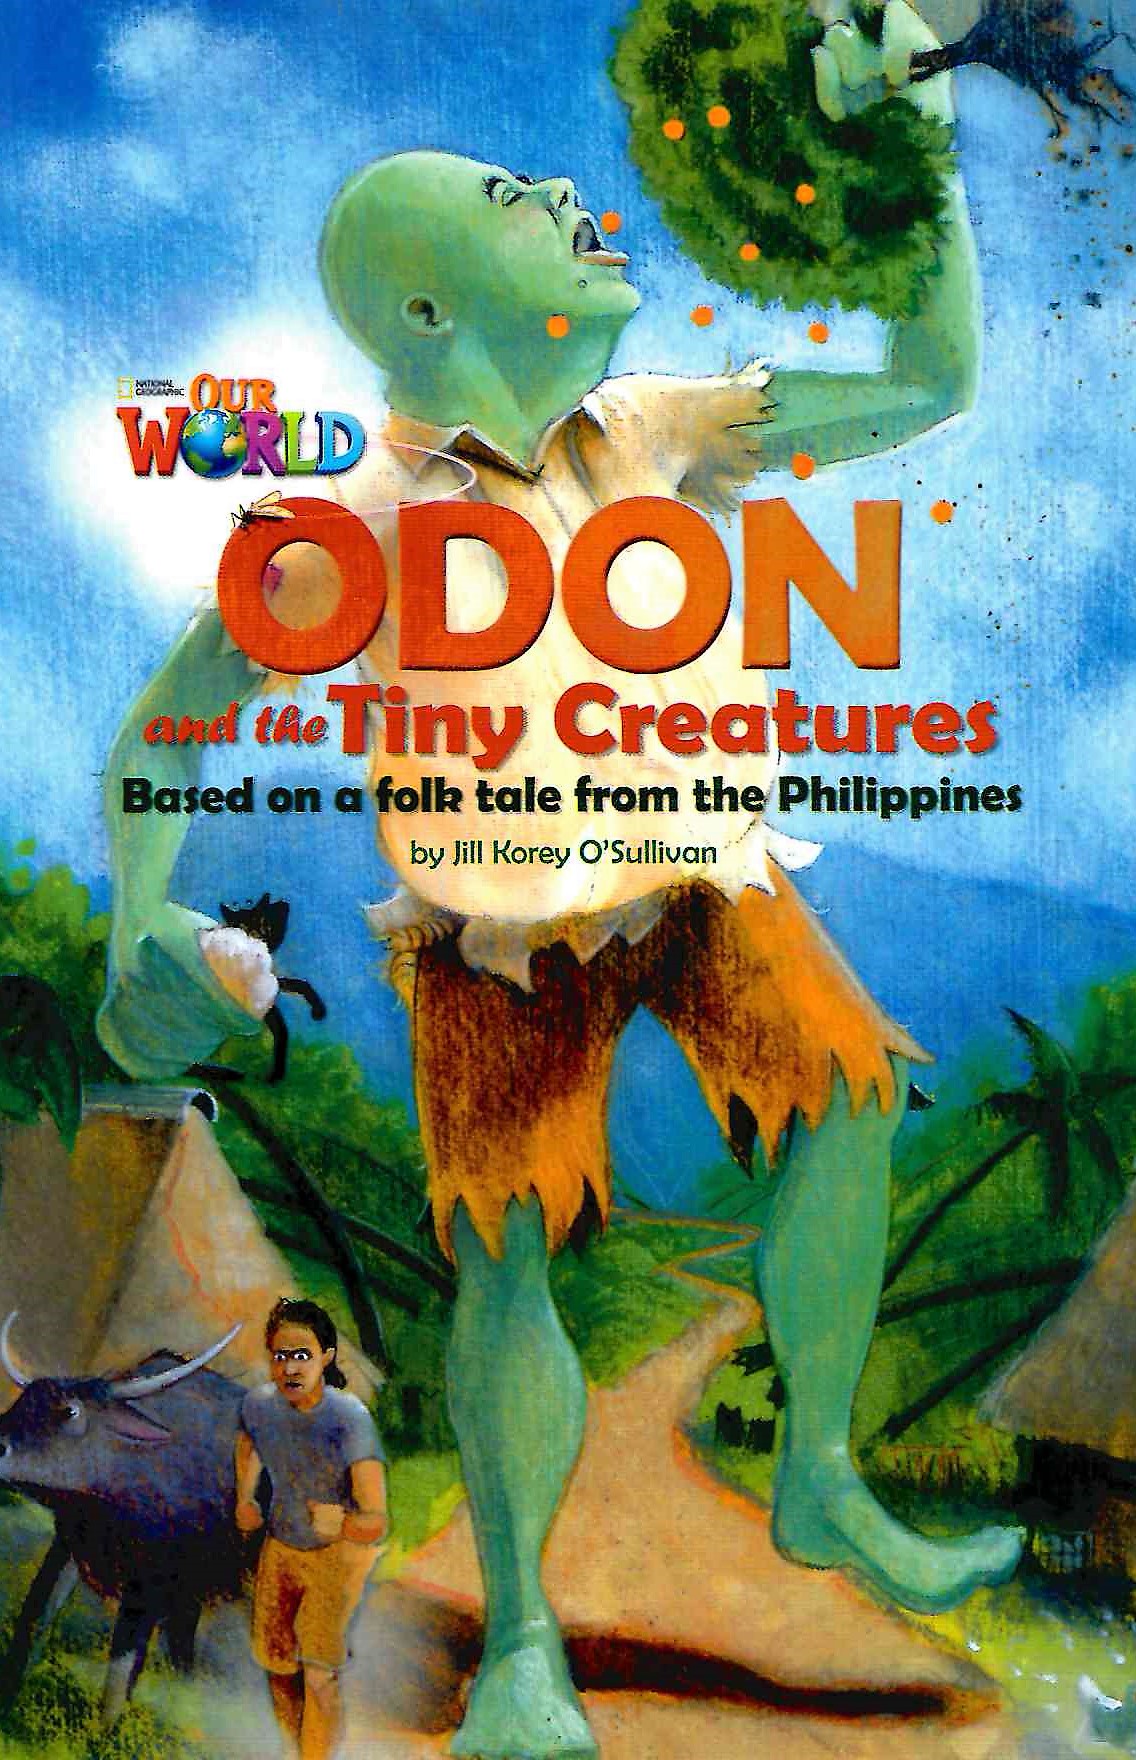 Our World 6 Odon And The Tiny Creatures / Книга для чтения